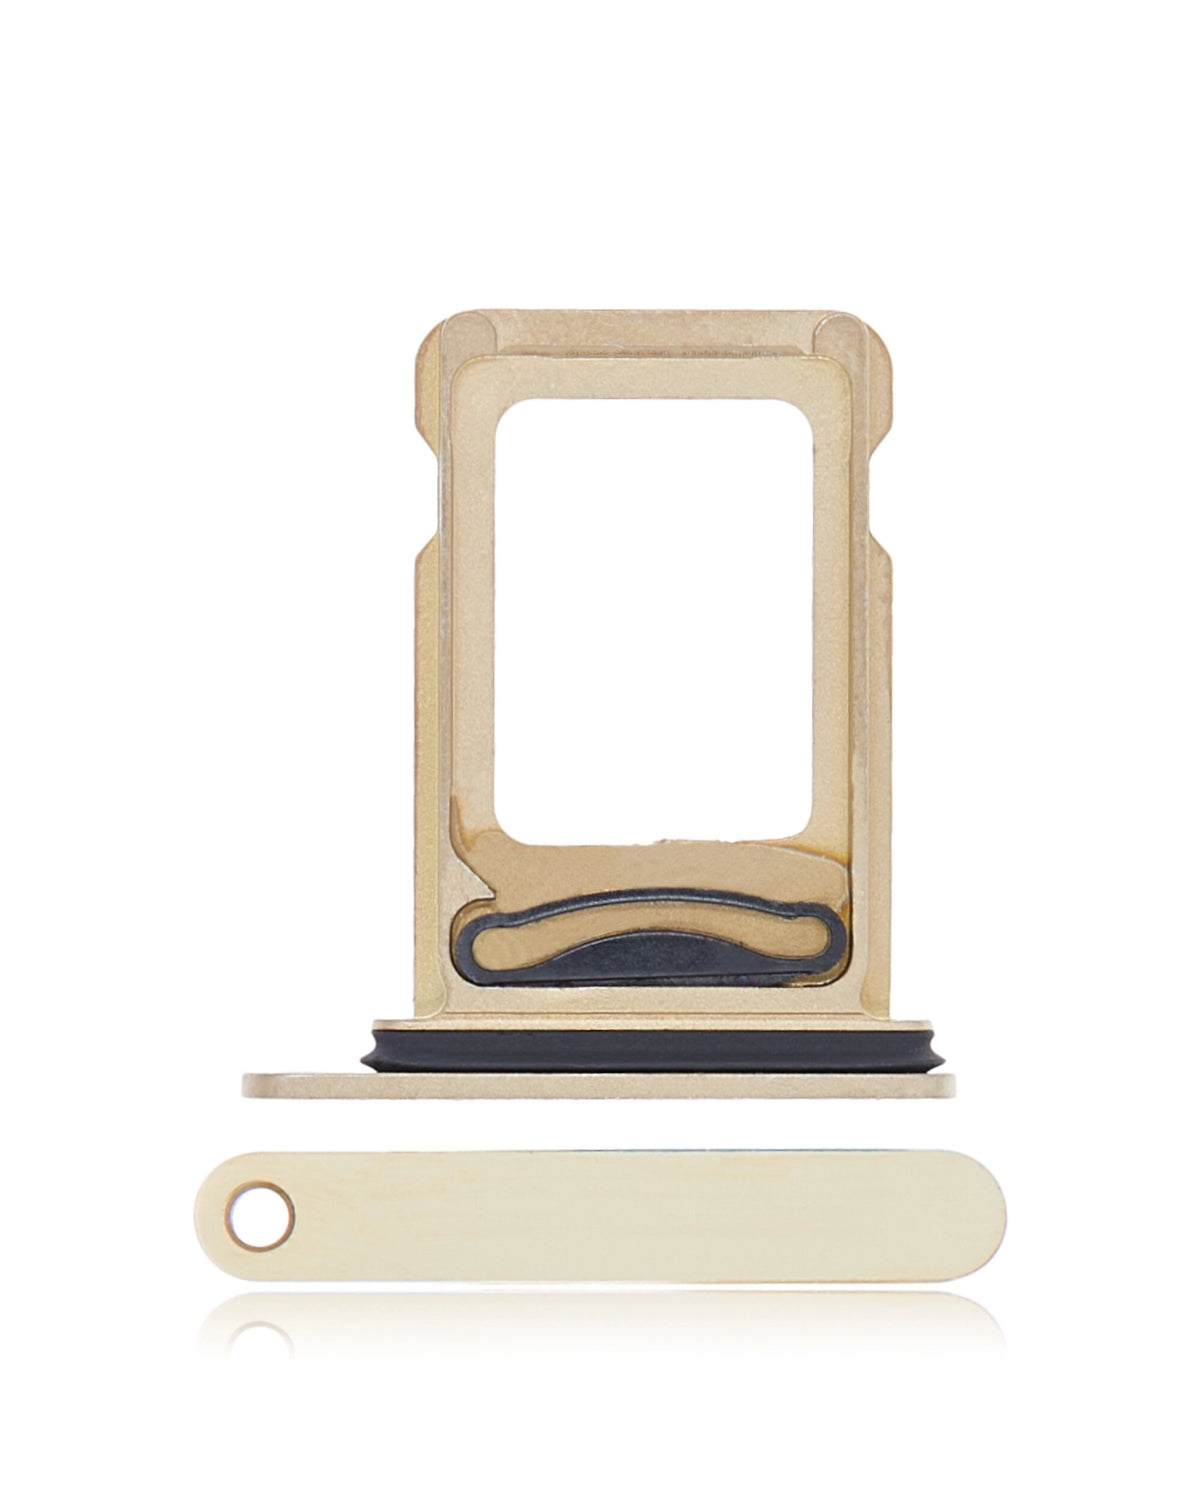 GOLD DUAL SIM CARD TRAY COMPATIBLE FOR IPHONE 13 PRO / 13 PRO MAX